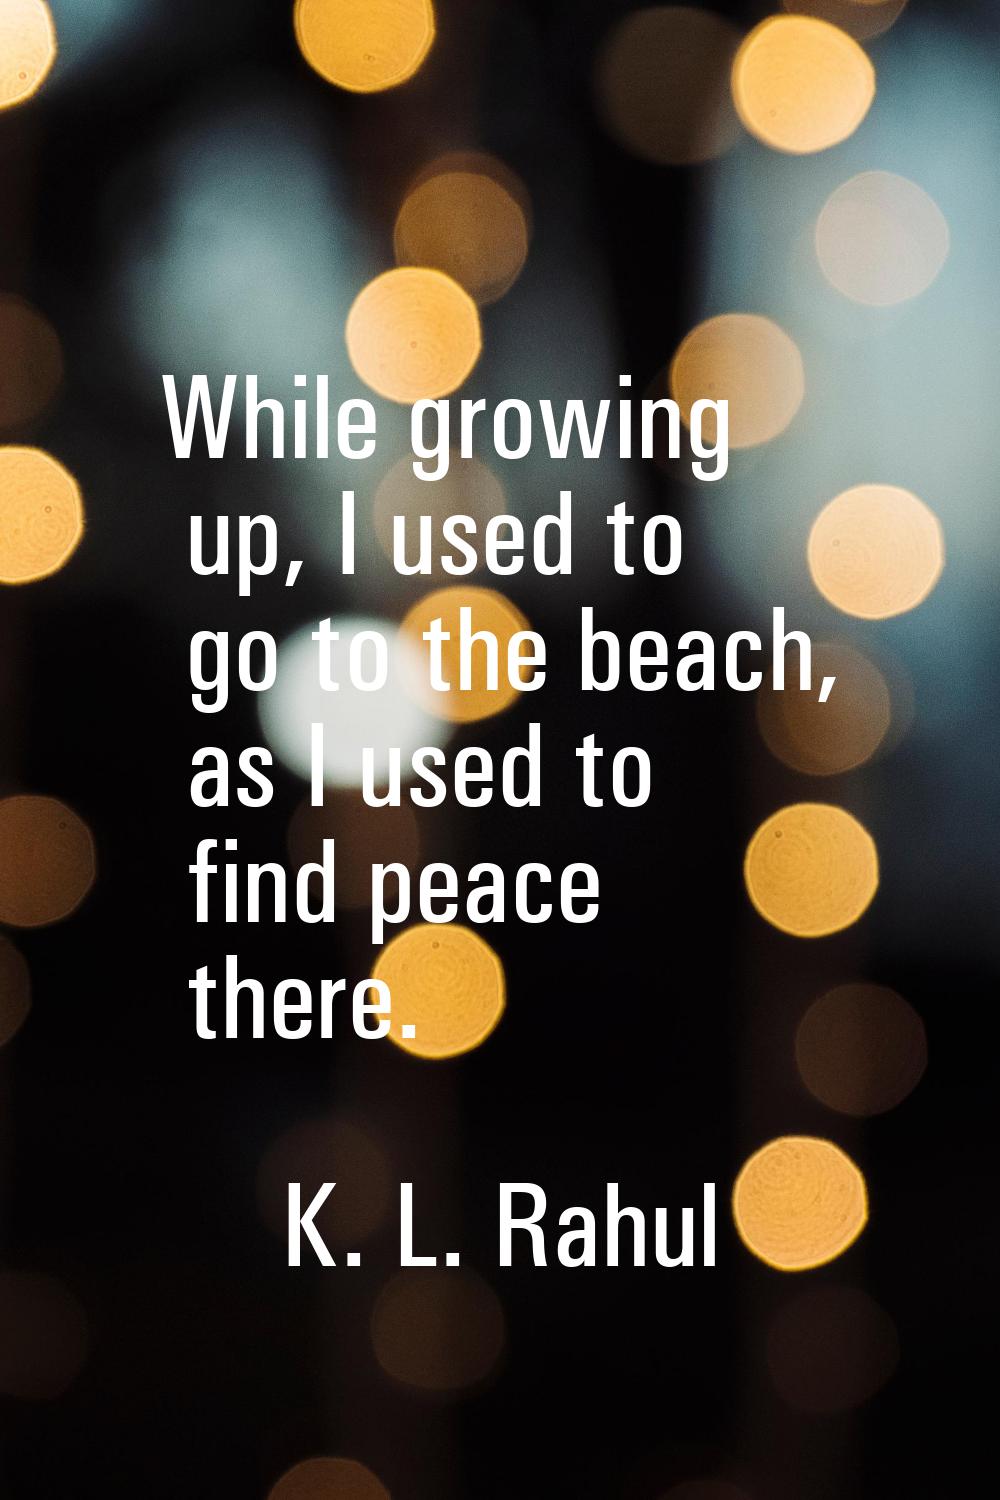 While growing up, I used to go to the beach, as I used to find peace there.